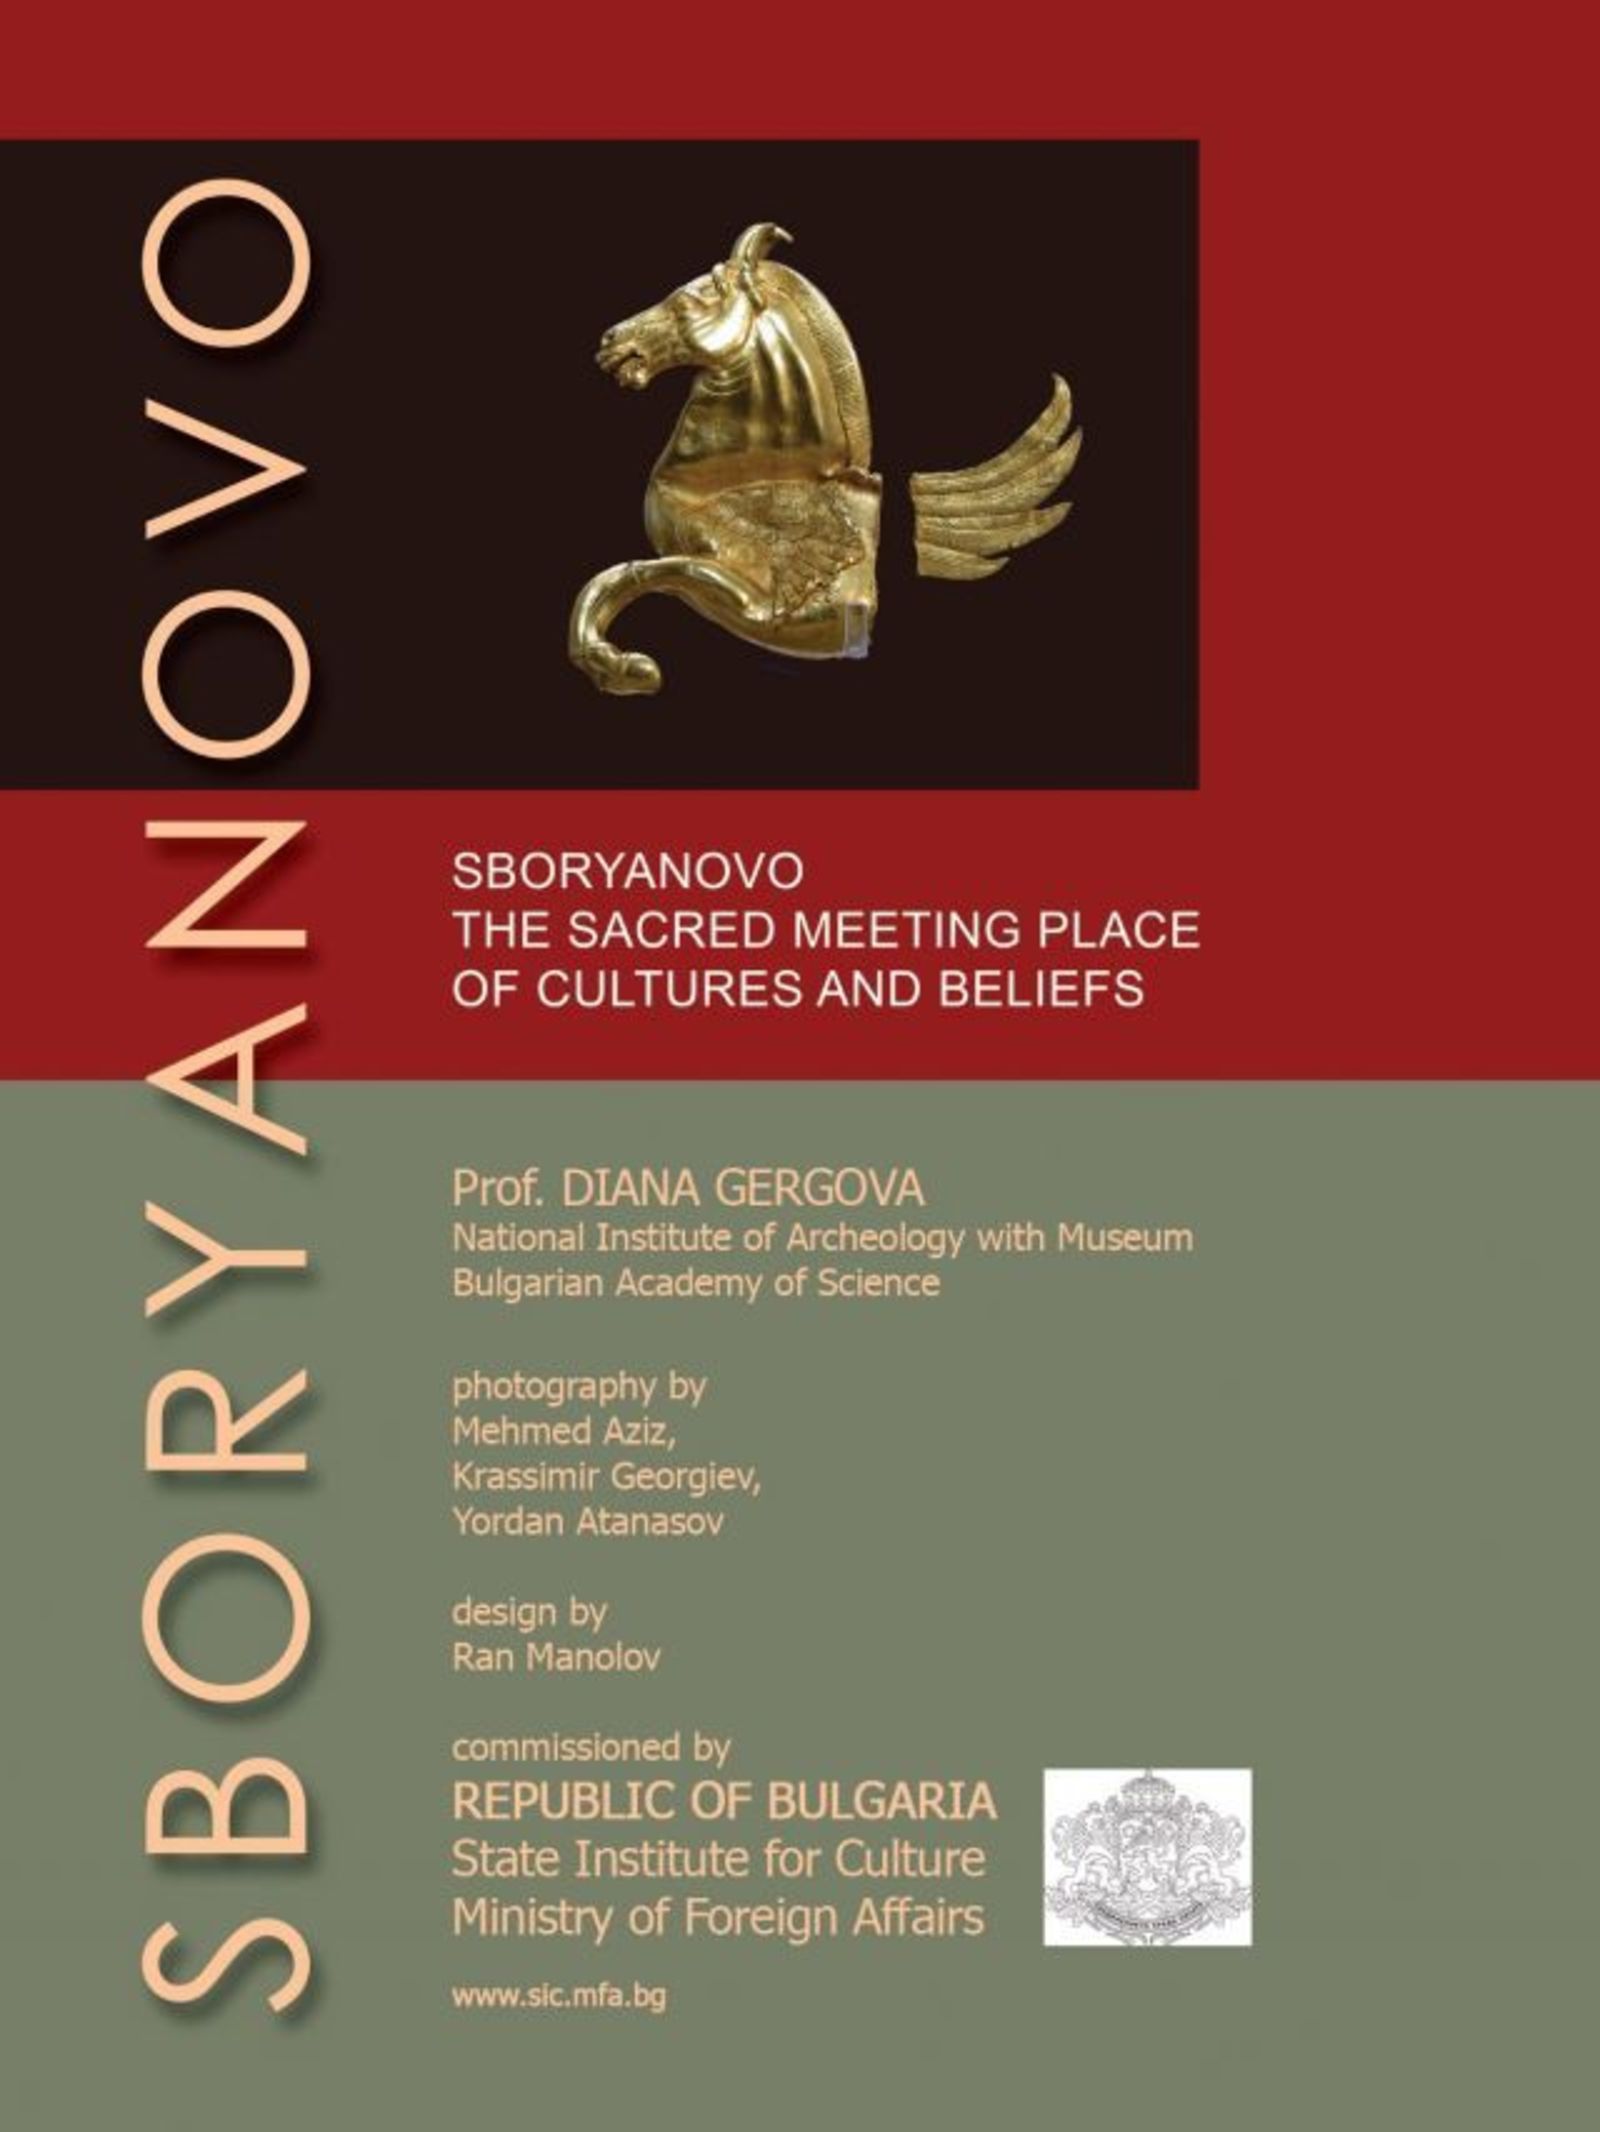 An Exhibition Presenting Bulgarian Archiologial Venue in the List of UNESCO Was Presented in France for the Day of Europe